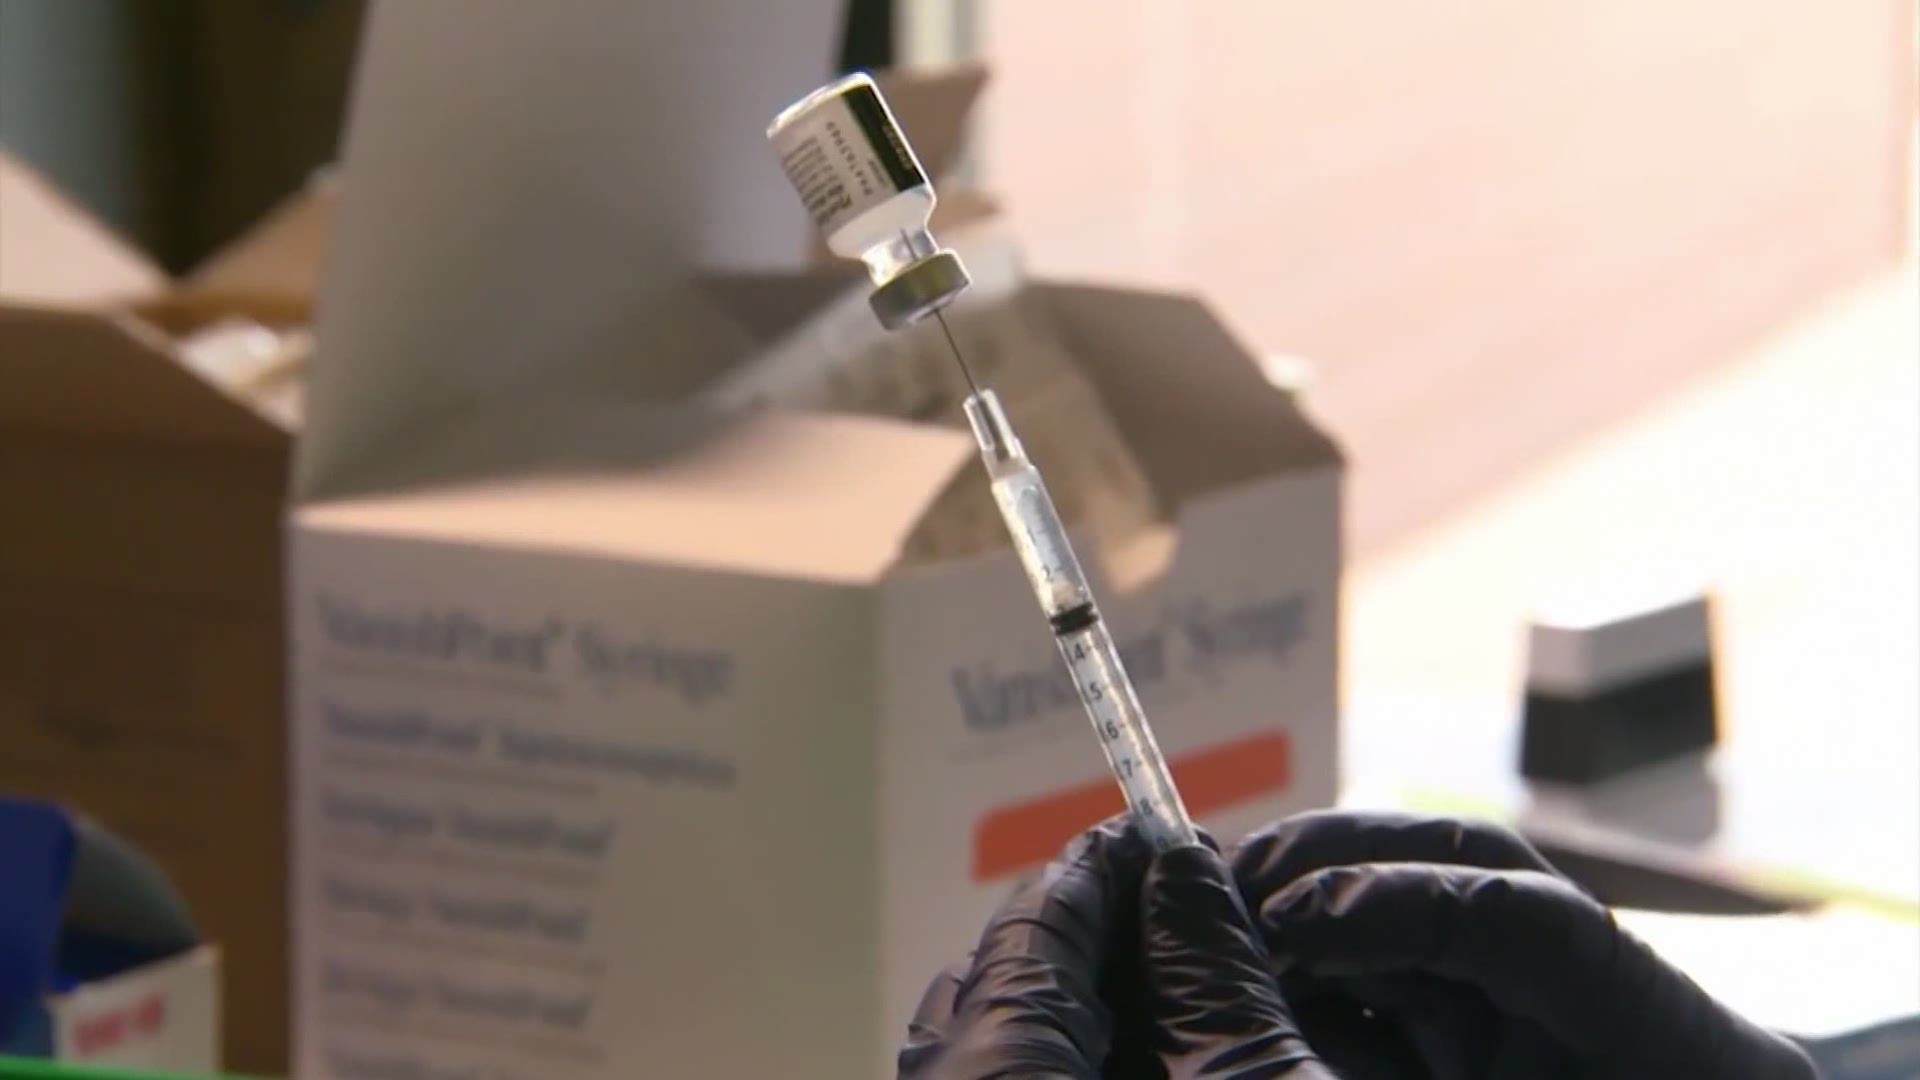 Right now about 50% of Texas adults have received at least one dose of the COVID vaccine. Dr. Peter Hotez says at 60% we could see a drop in virus transmission.